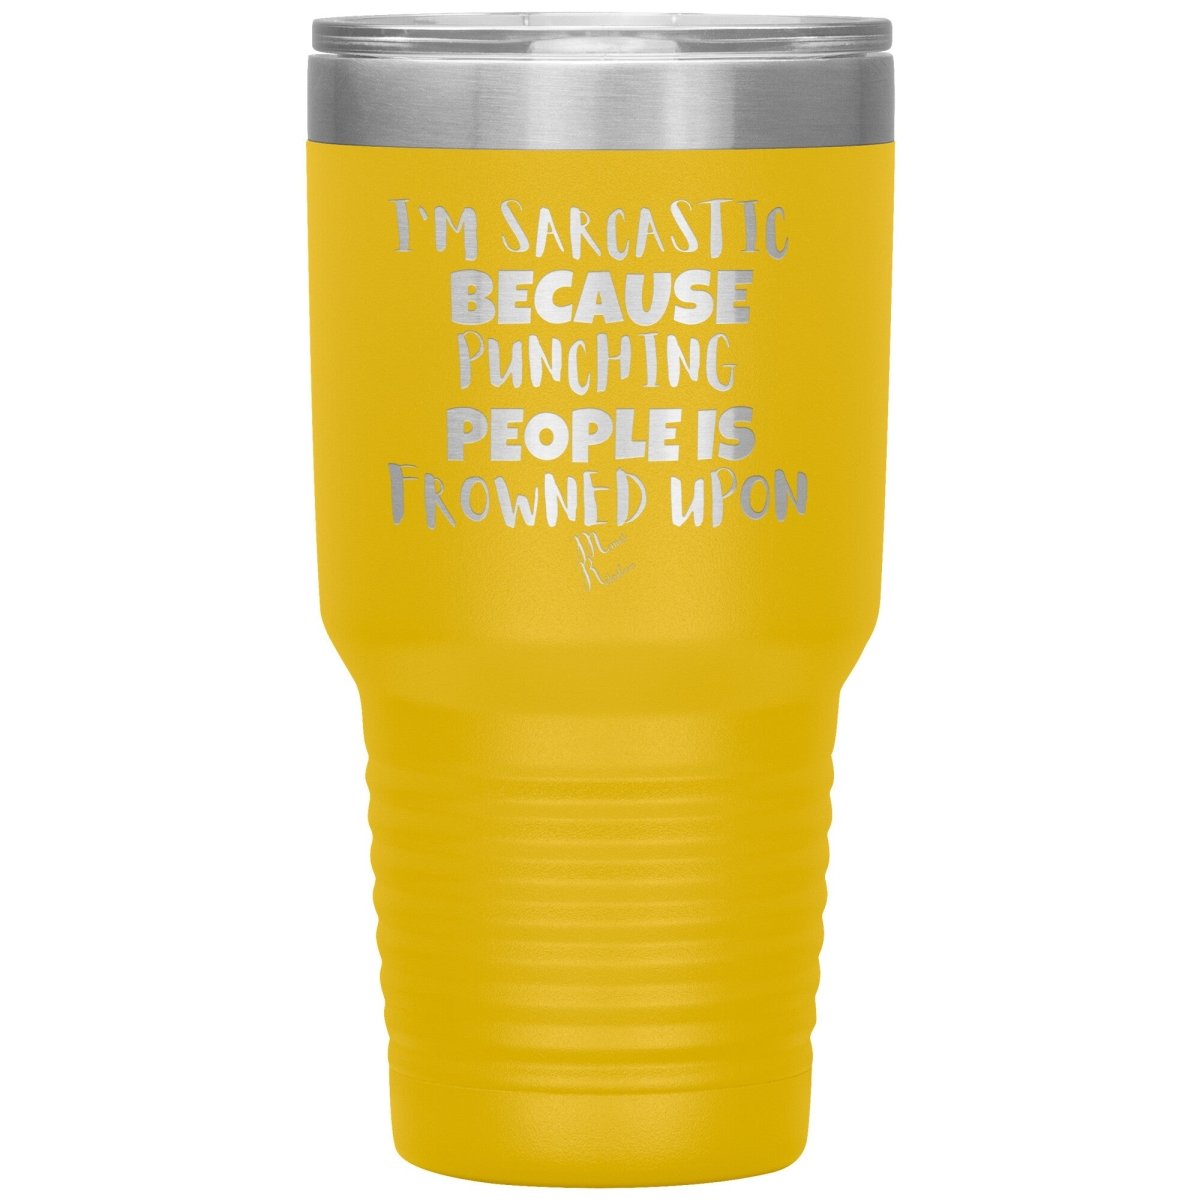 I'm Sarcastic Because Punching People is Frowned Upon Tumblers, 30oz Insulated Tumbler / Yellow - MemesRetail.com